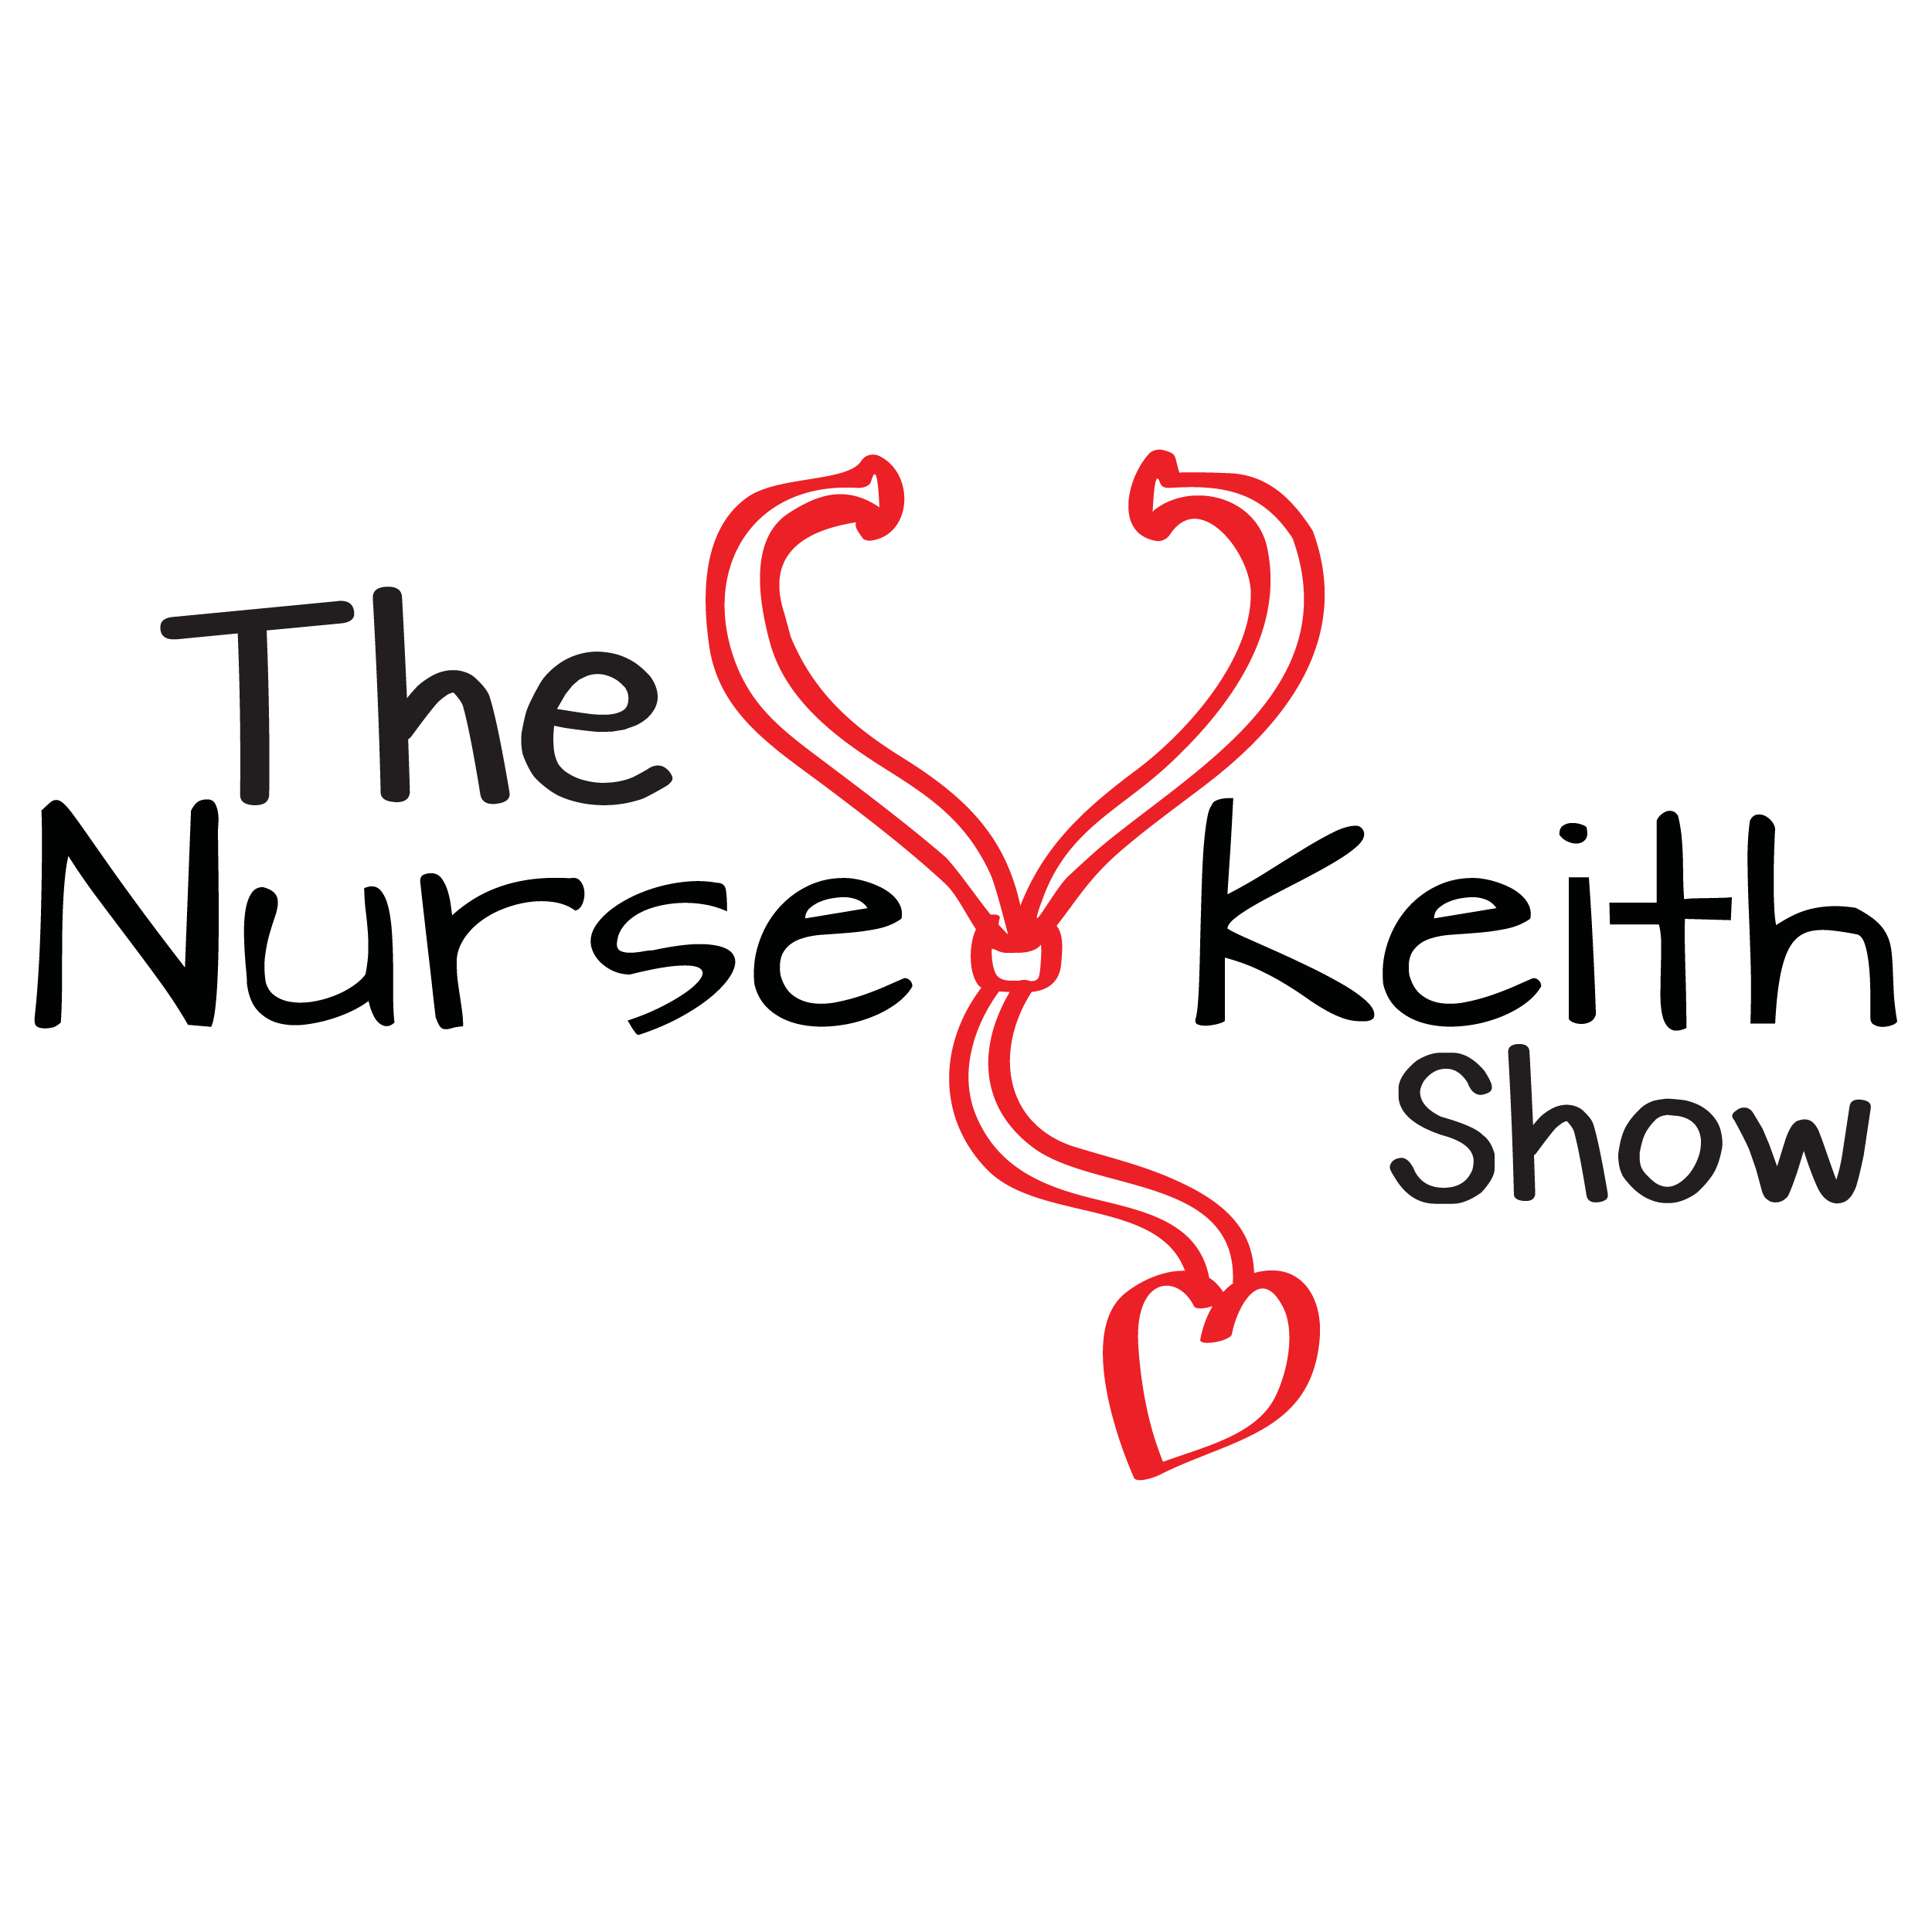 How Does Building Nurse Resilience Move the Needle in Healthcare?  | The Nurse Keith Show, EPS 259